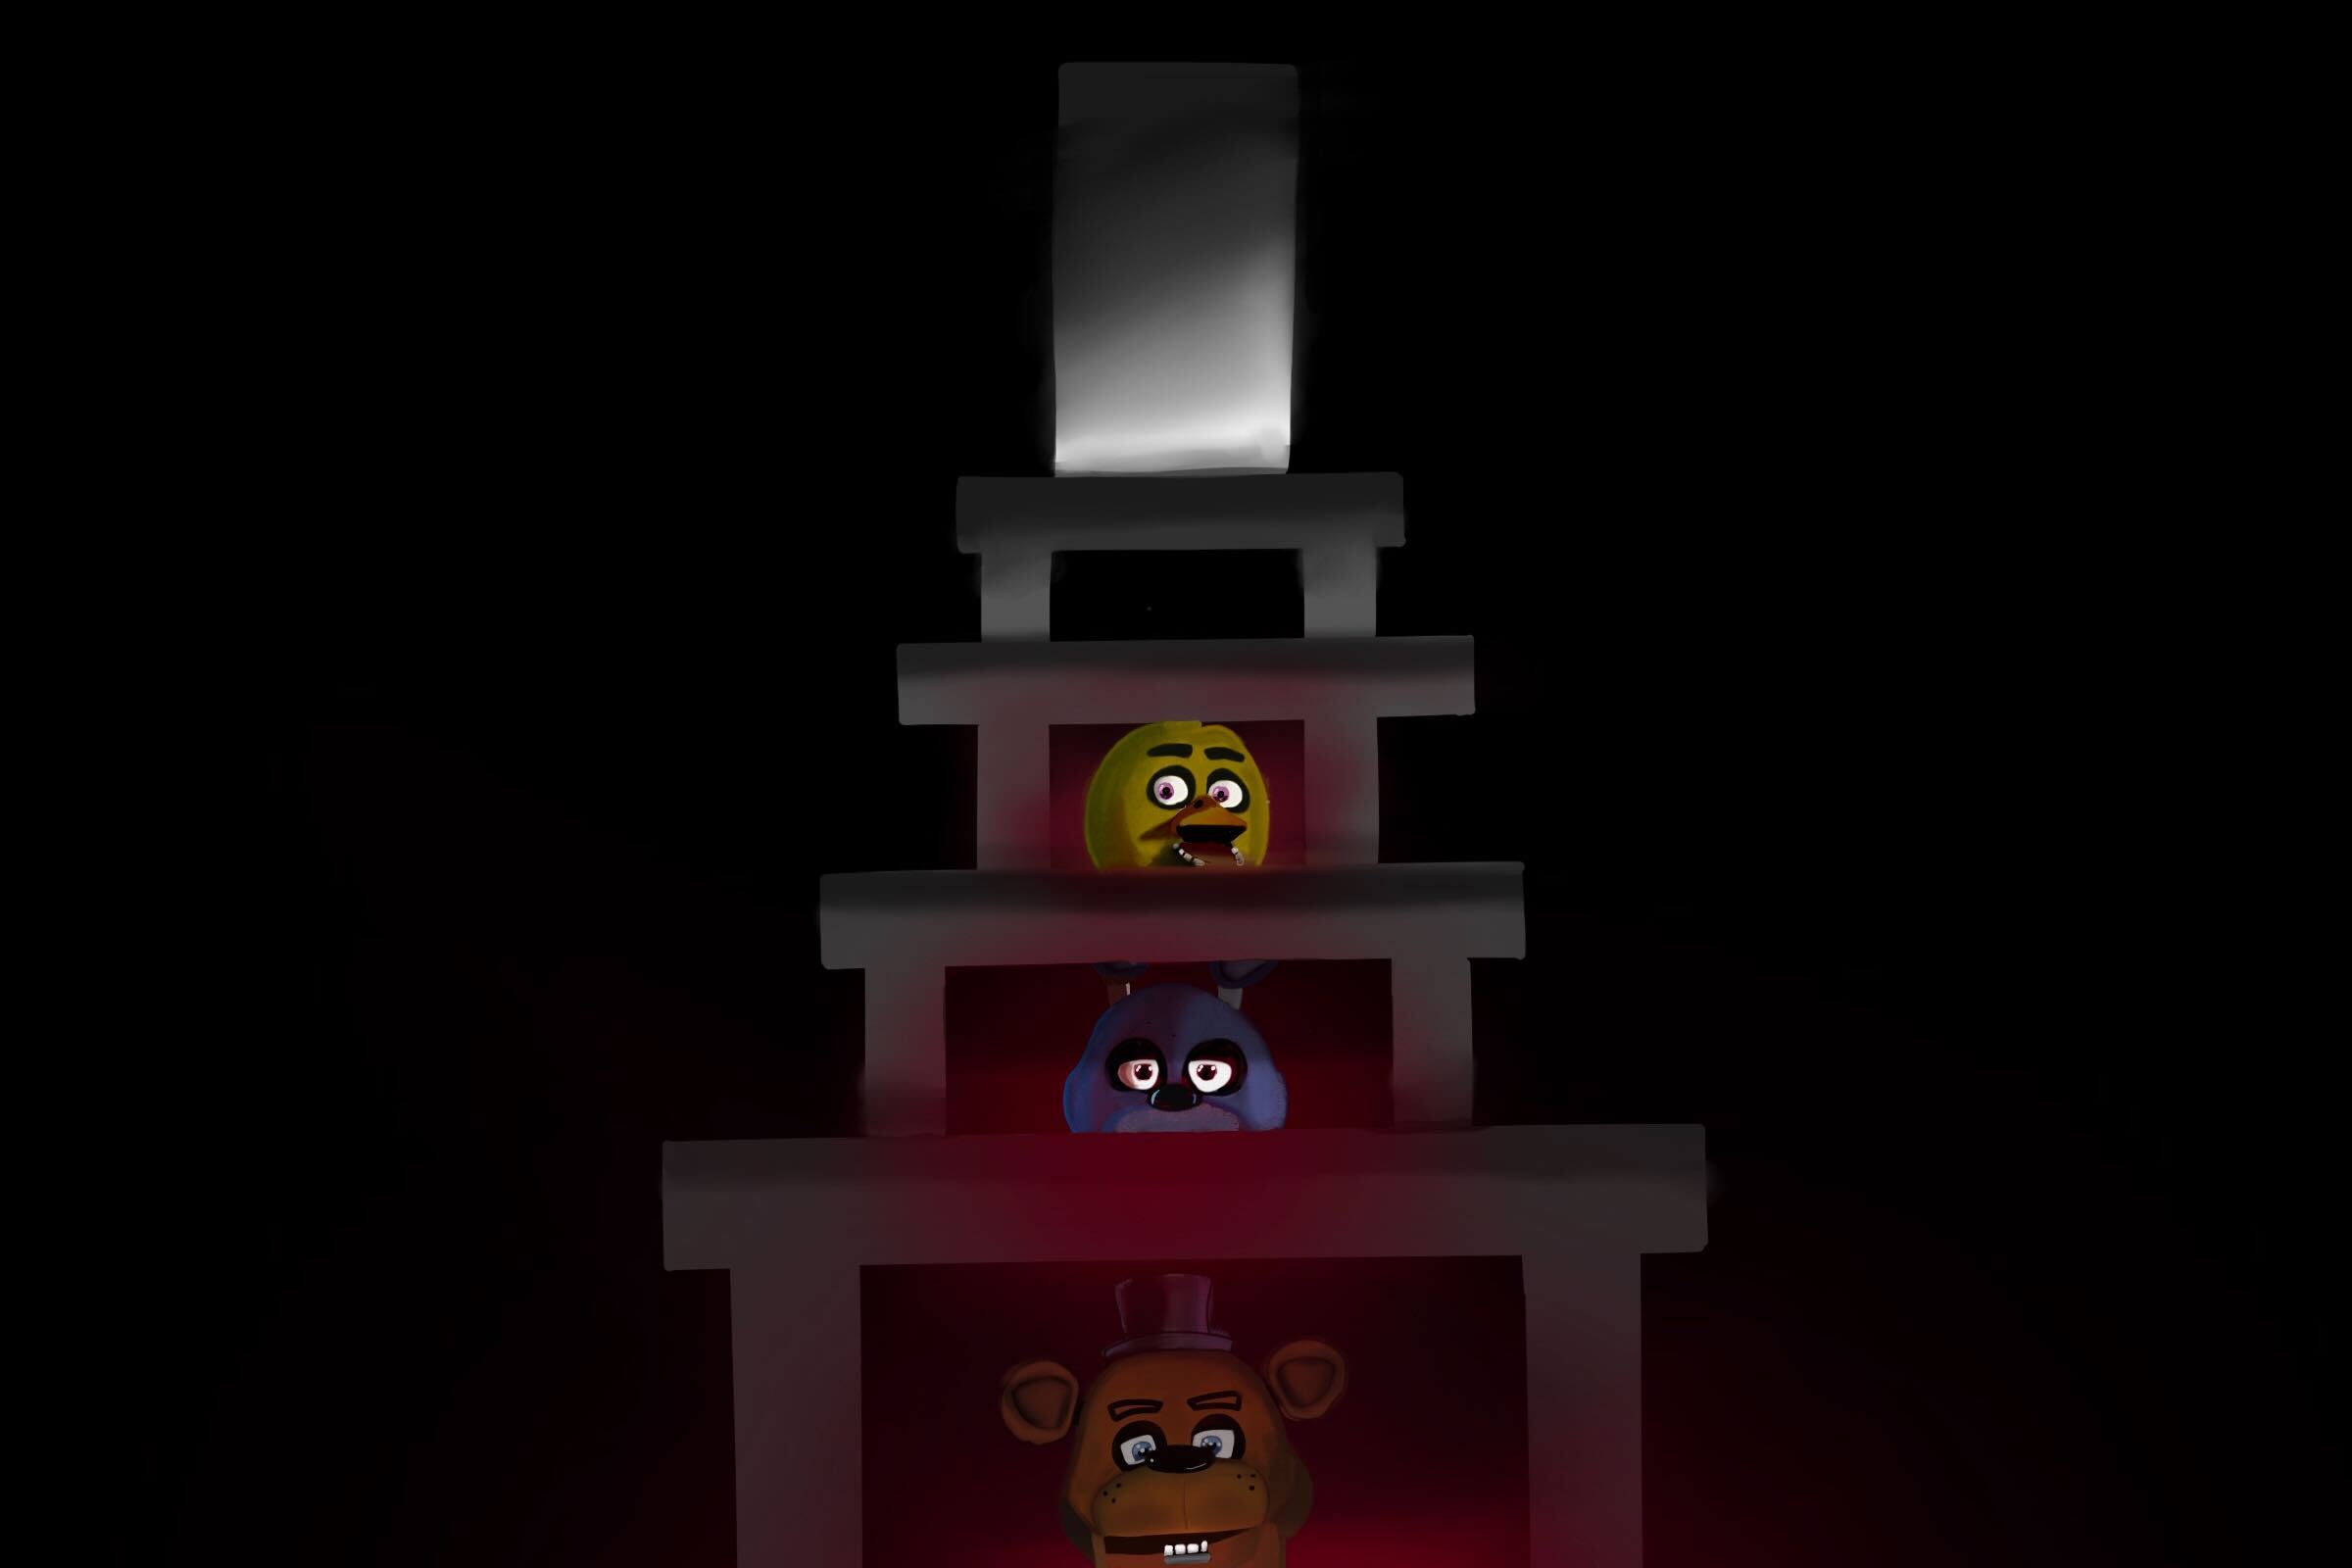 Stream Five Nights At Freddy's 1 Song - The Living Tombstone